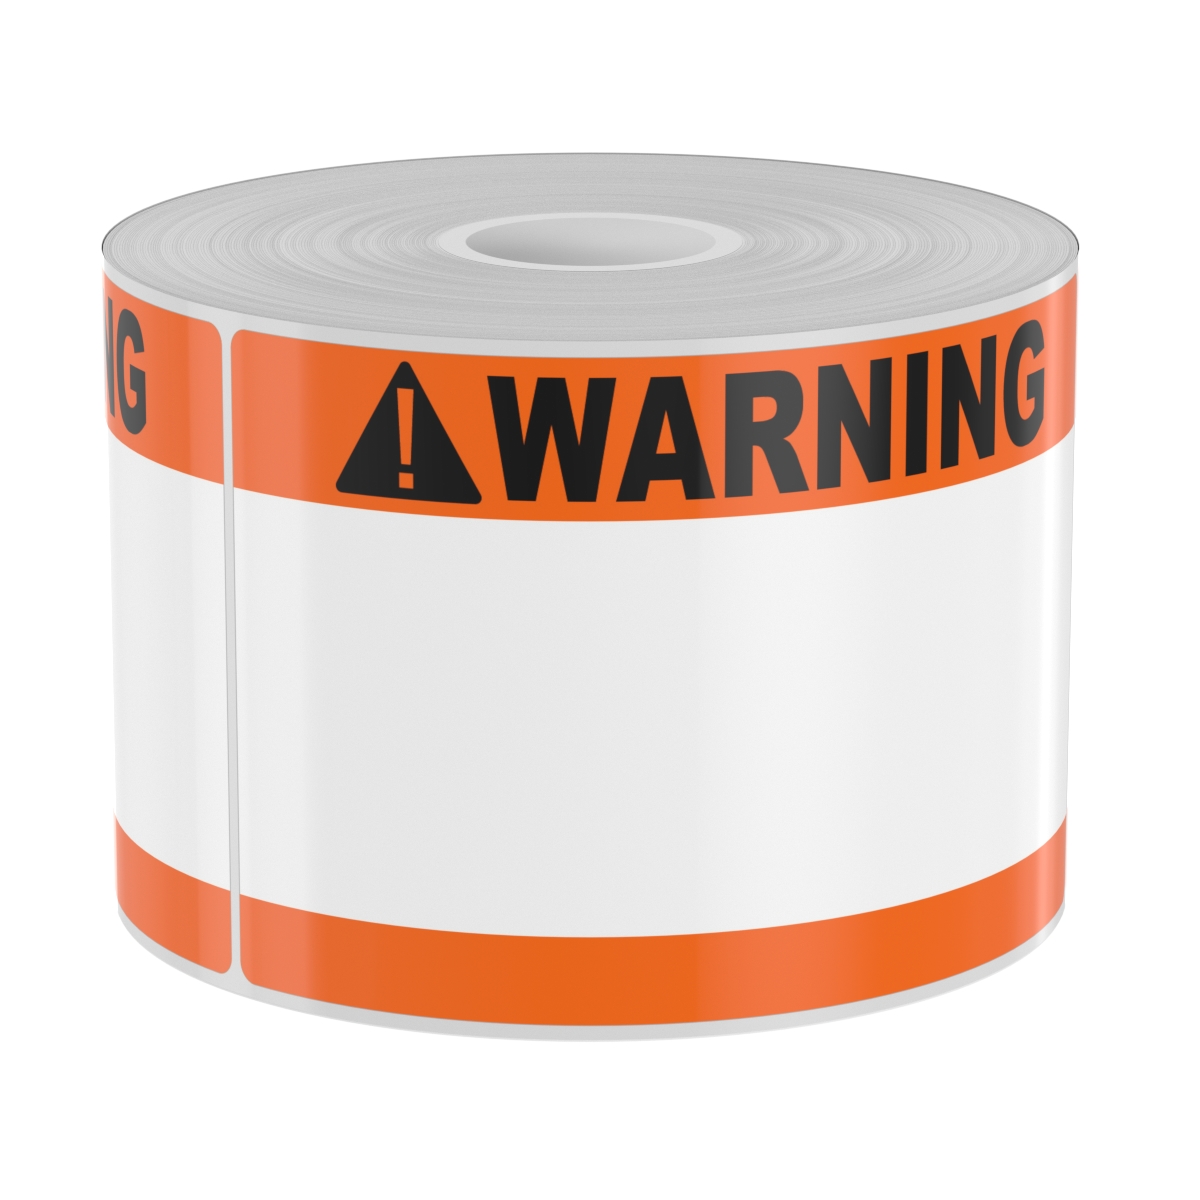 250 3in x 5in High-Performance Orange Double Band with Black Warning